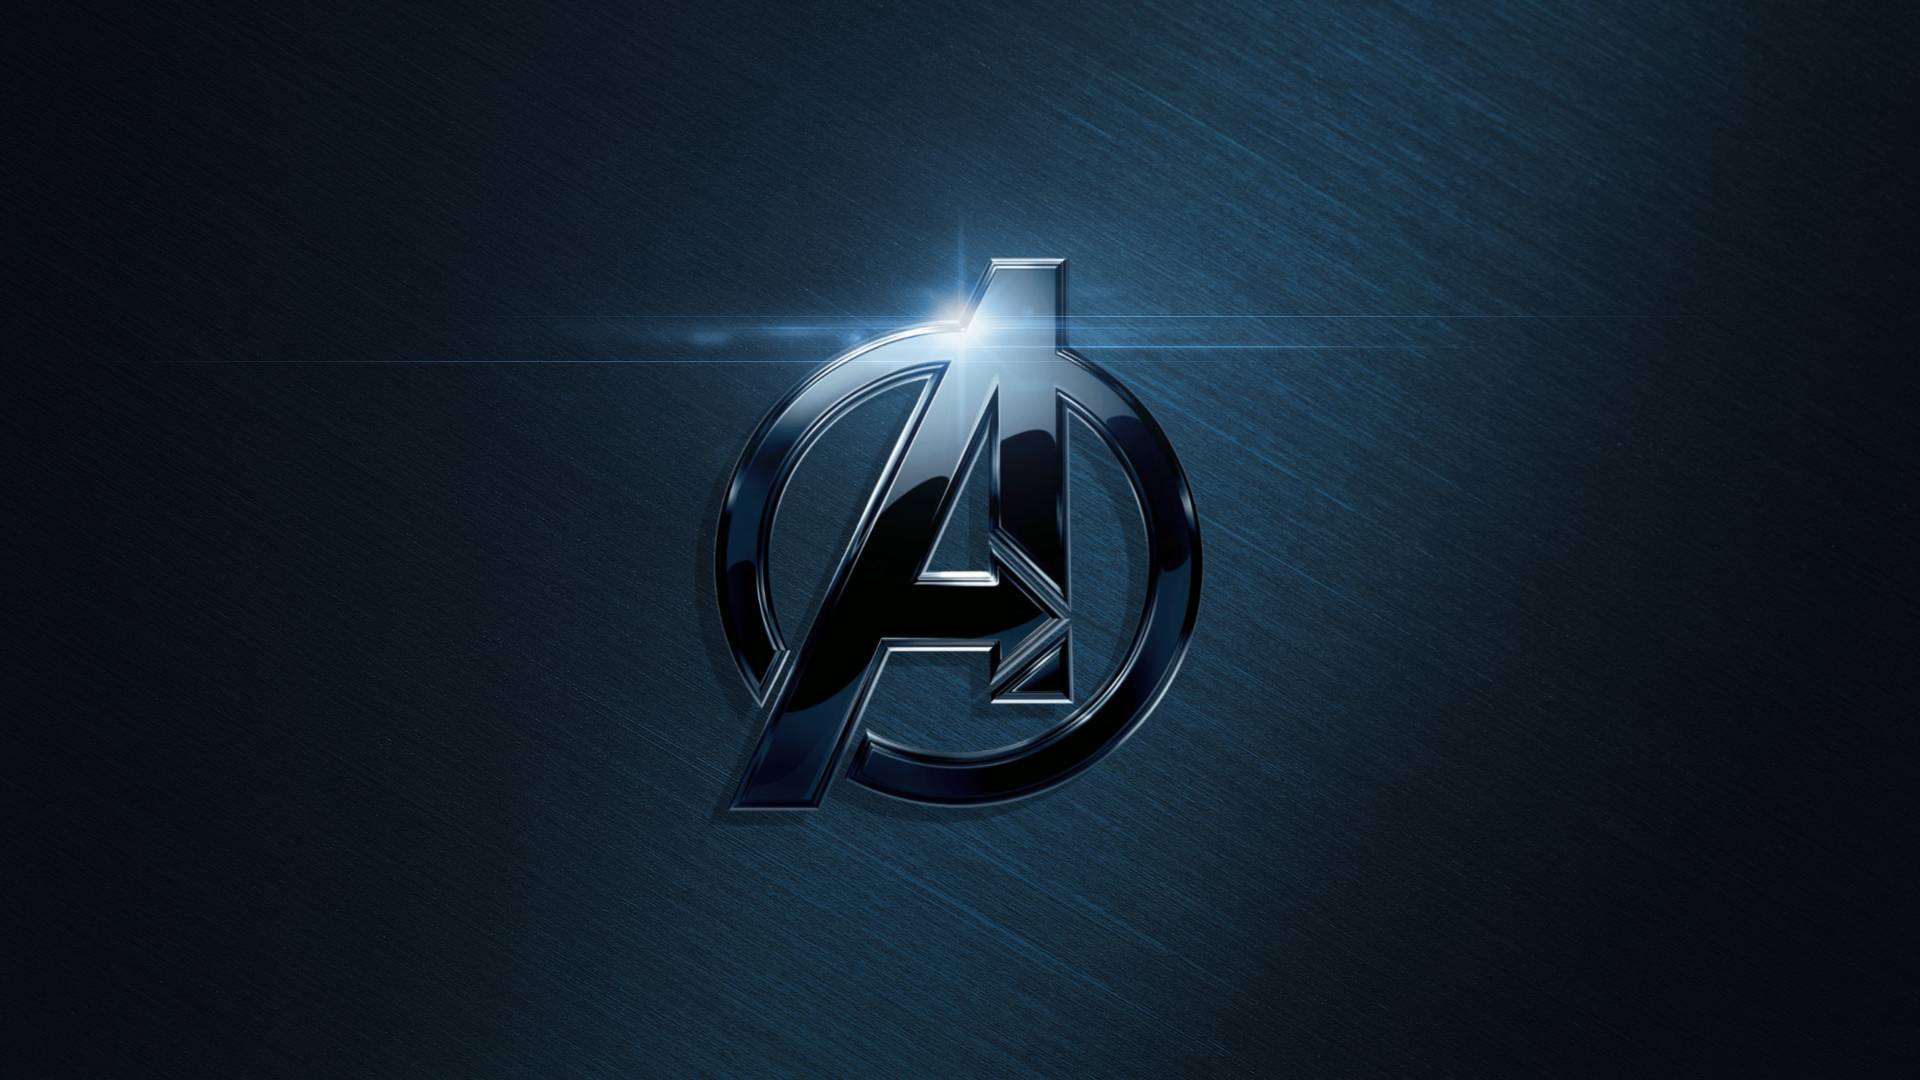 The Avengers Archives Wallpaper Free DownloadHD Wallpaper